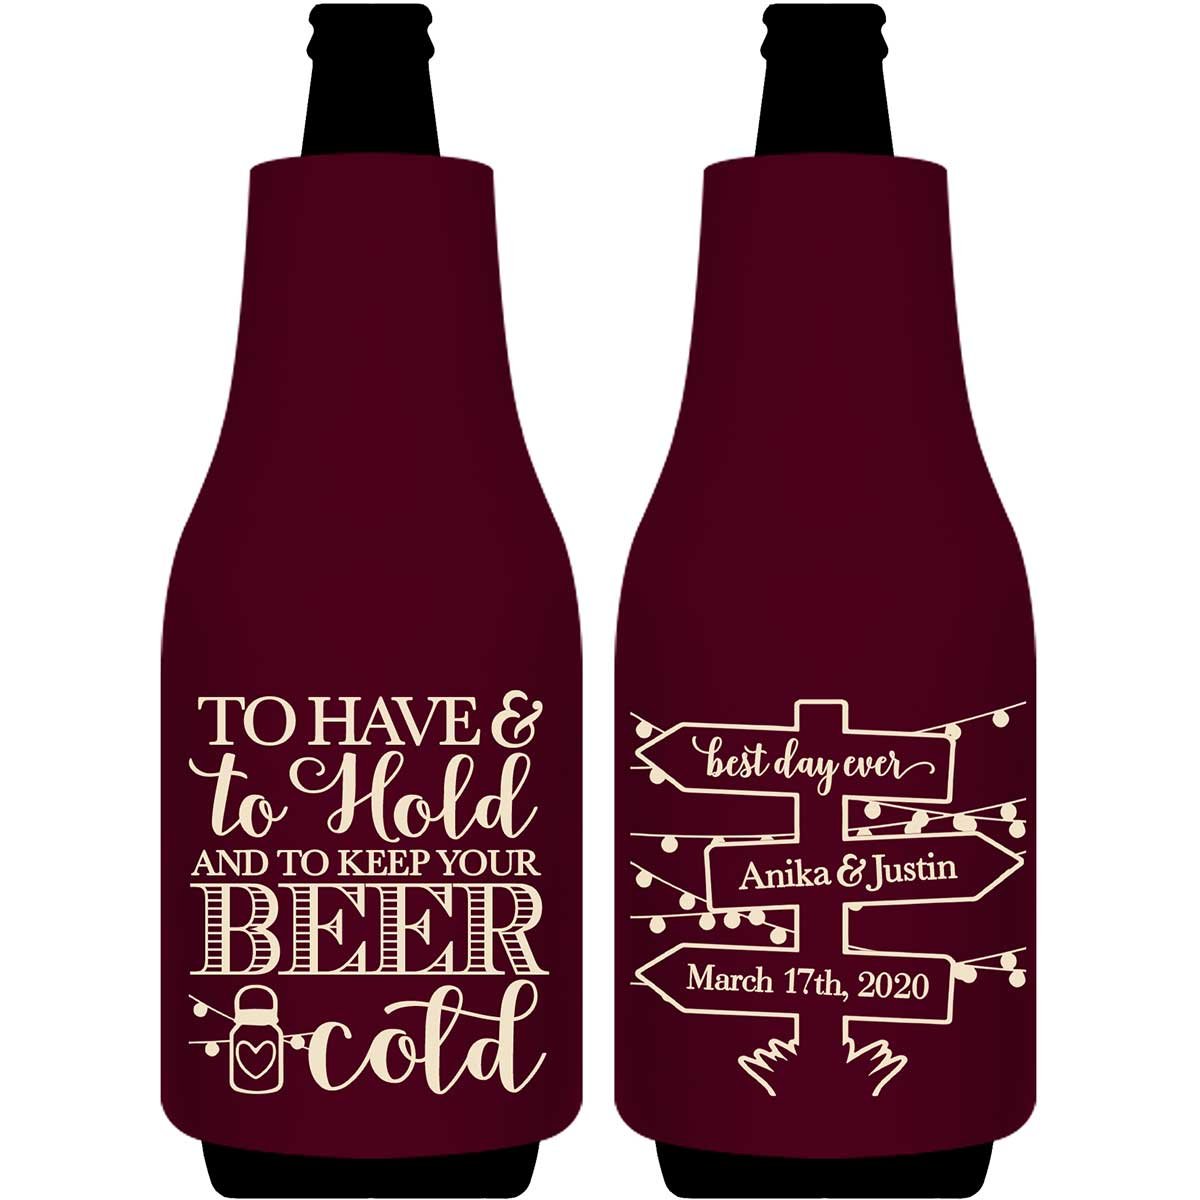 To Have & To Hold Keep Your Beer Cold 1D Foldable Bottle Sleeve Koozies Wedding Gifts for Guests